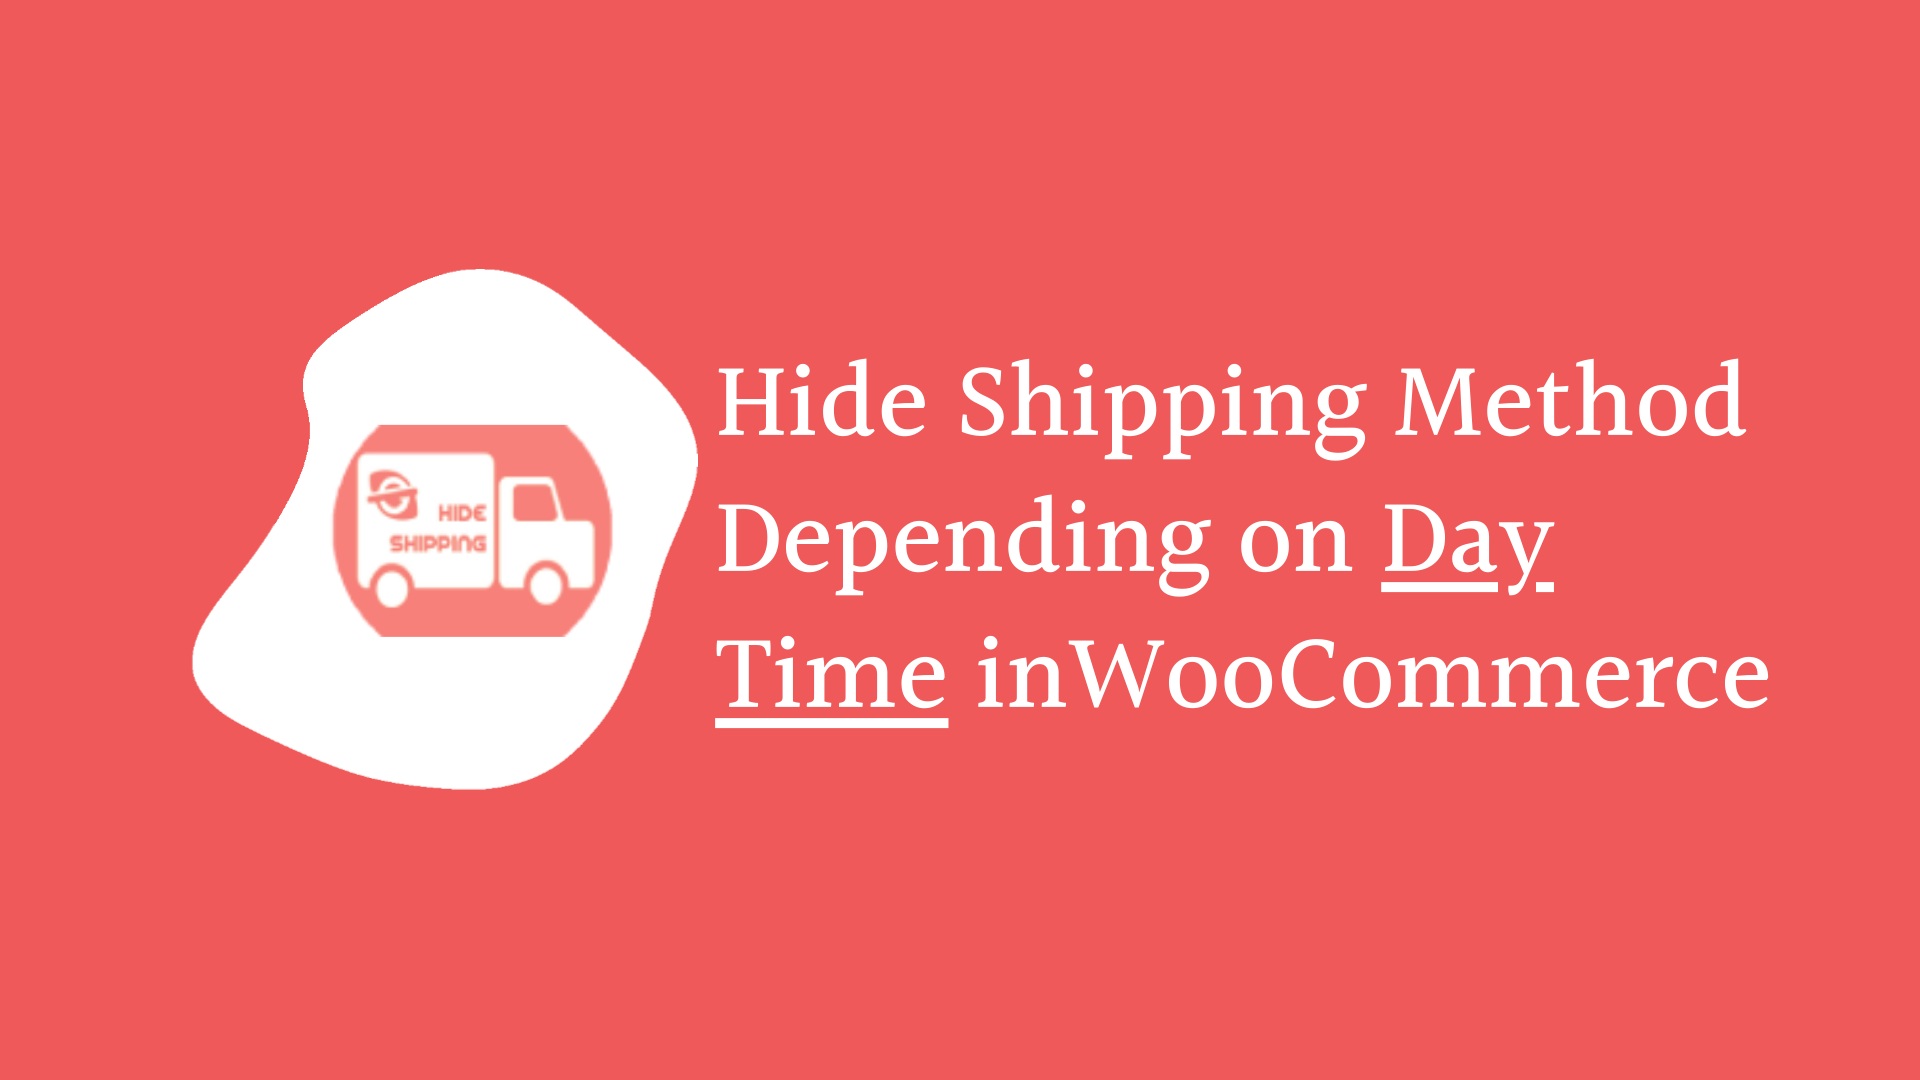 How to Hide the Shipping Method Depending On Day Time in WooCommerce